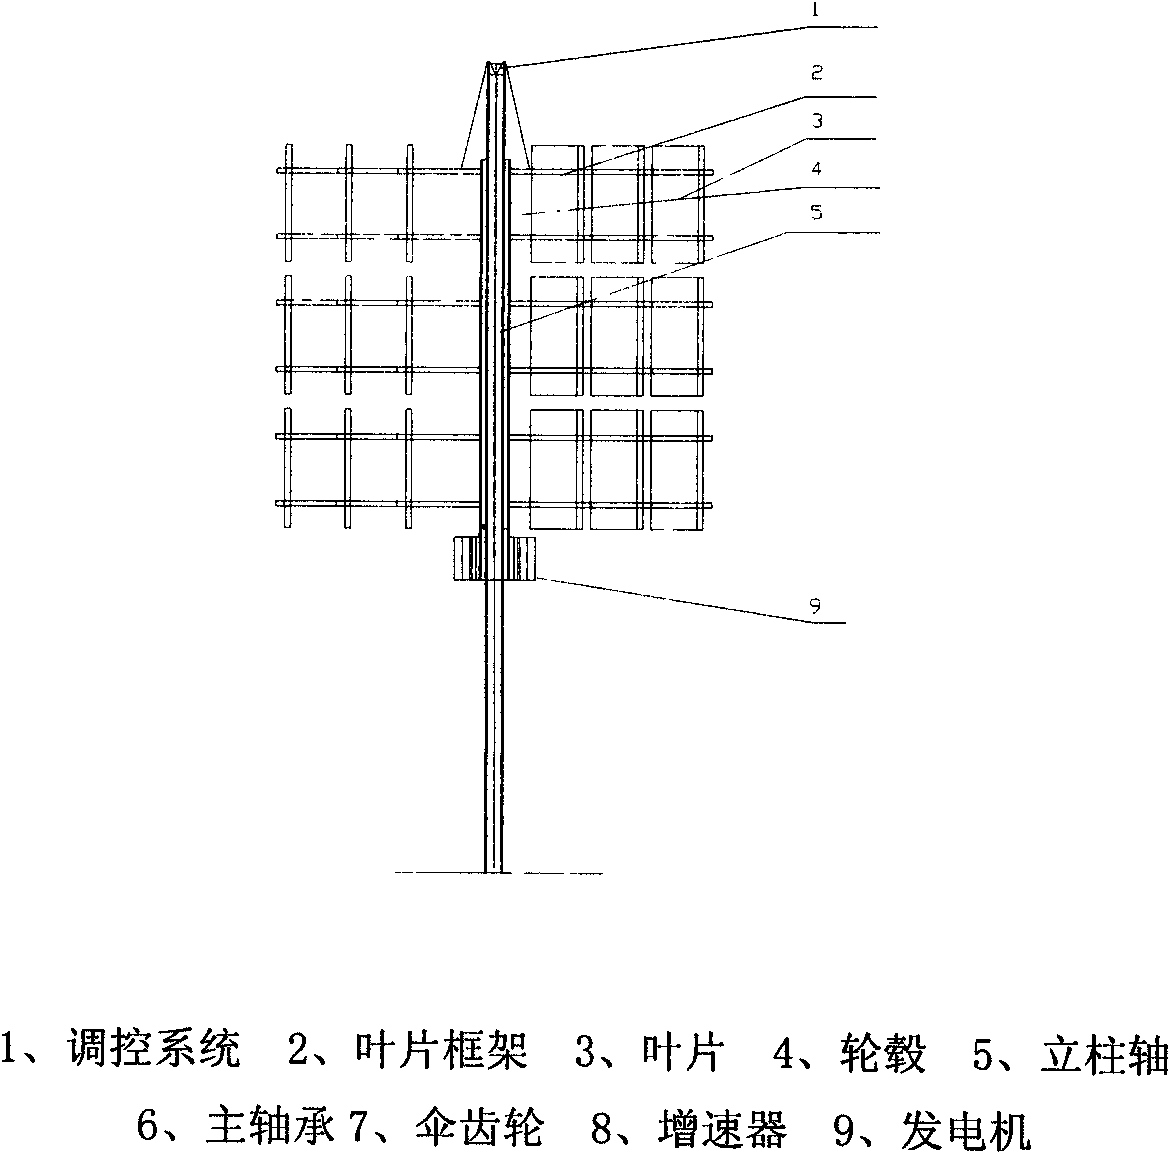 Variable-paddle type vertical axis wind turbine